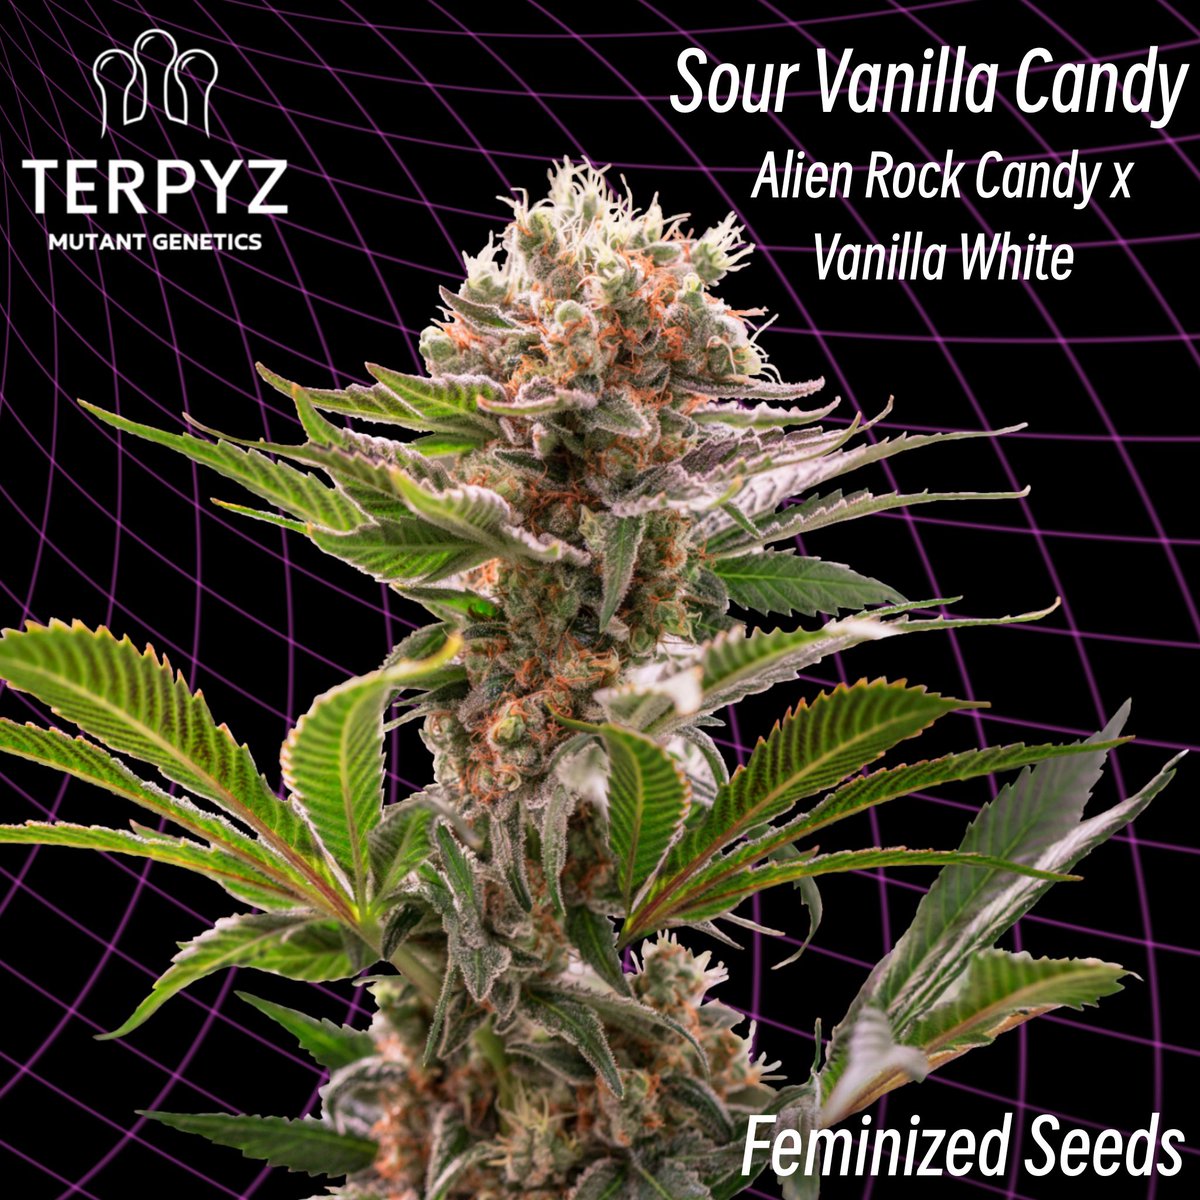 Sour Vanilla Candy (feminized non mutant)

Genetics: Alien Rock Candy x Vanilla White

Flavour & Aroma: Pungent Fruit with lime candy and hints of Vanilla

#WEEDART #marajuanagrowers #CannabisInfluencer #growweedeasy #cannabisgrowing #stoner #weedpics #cannabislover